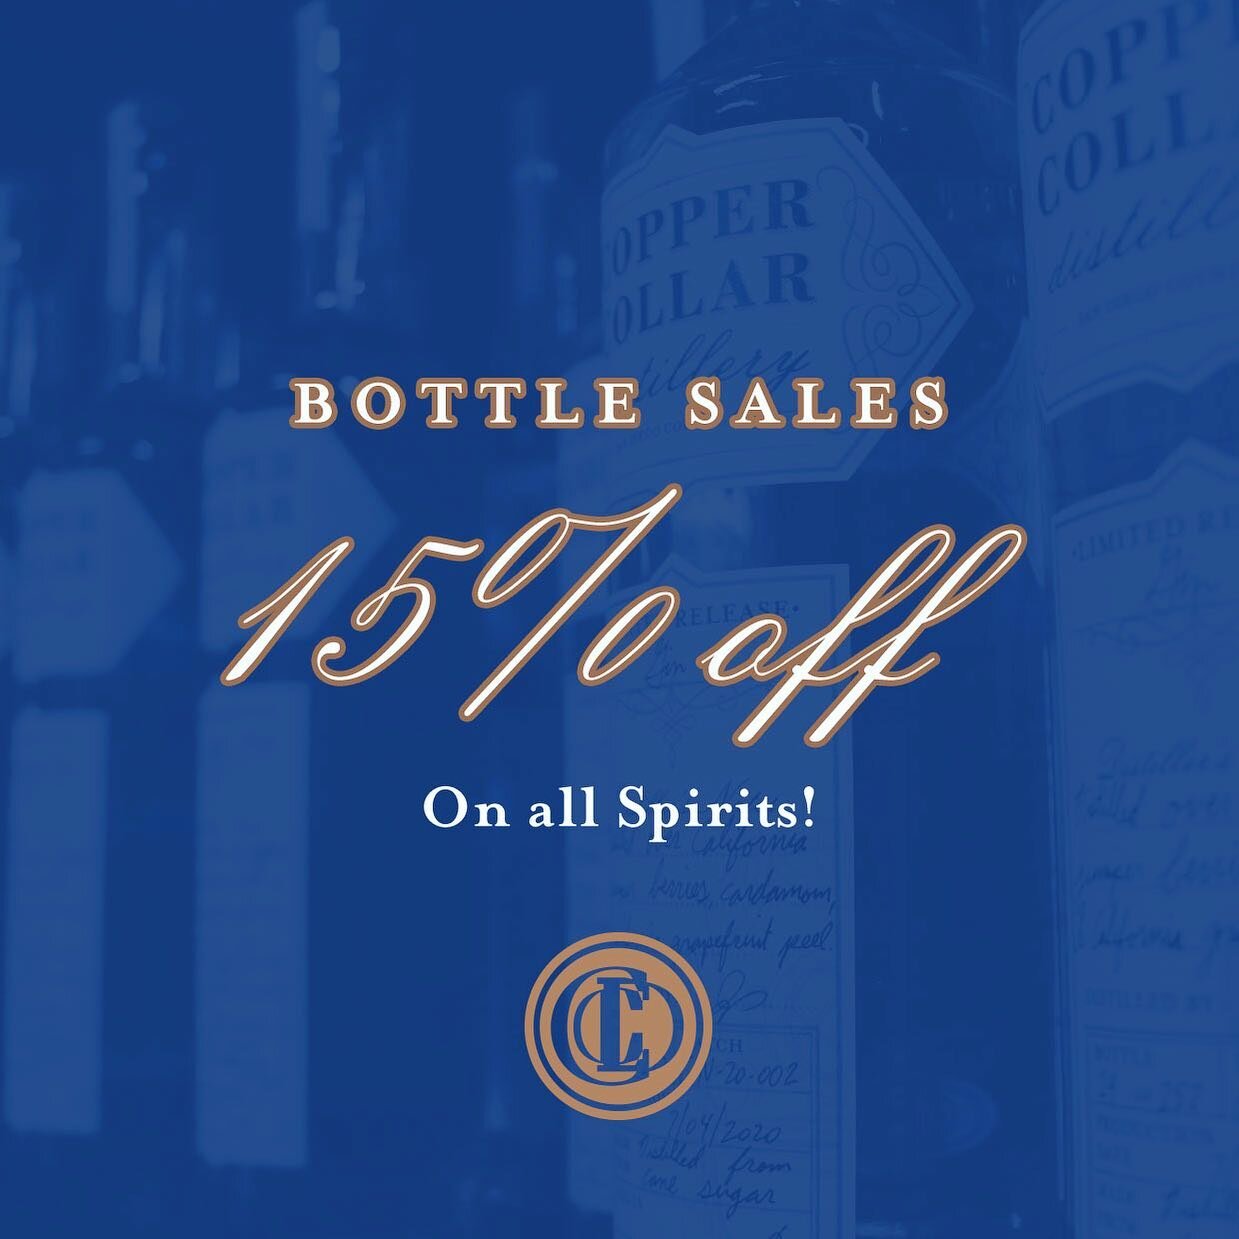 Restock your home bar by visiting our tasting room this weekend and receiving 15% off all bottle sales! 
.
.
.
.
.
.
Our tasting room is open Friday from 4pm - 7pm and Saturday from 12pm to 7pm for tastings and bottle sales! #coppercollardistillery #